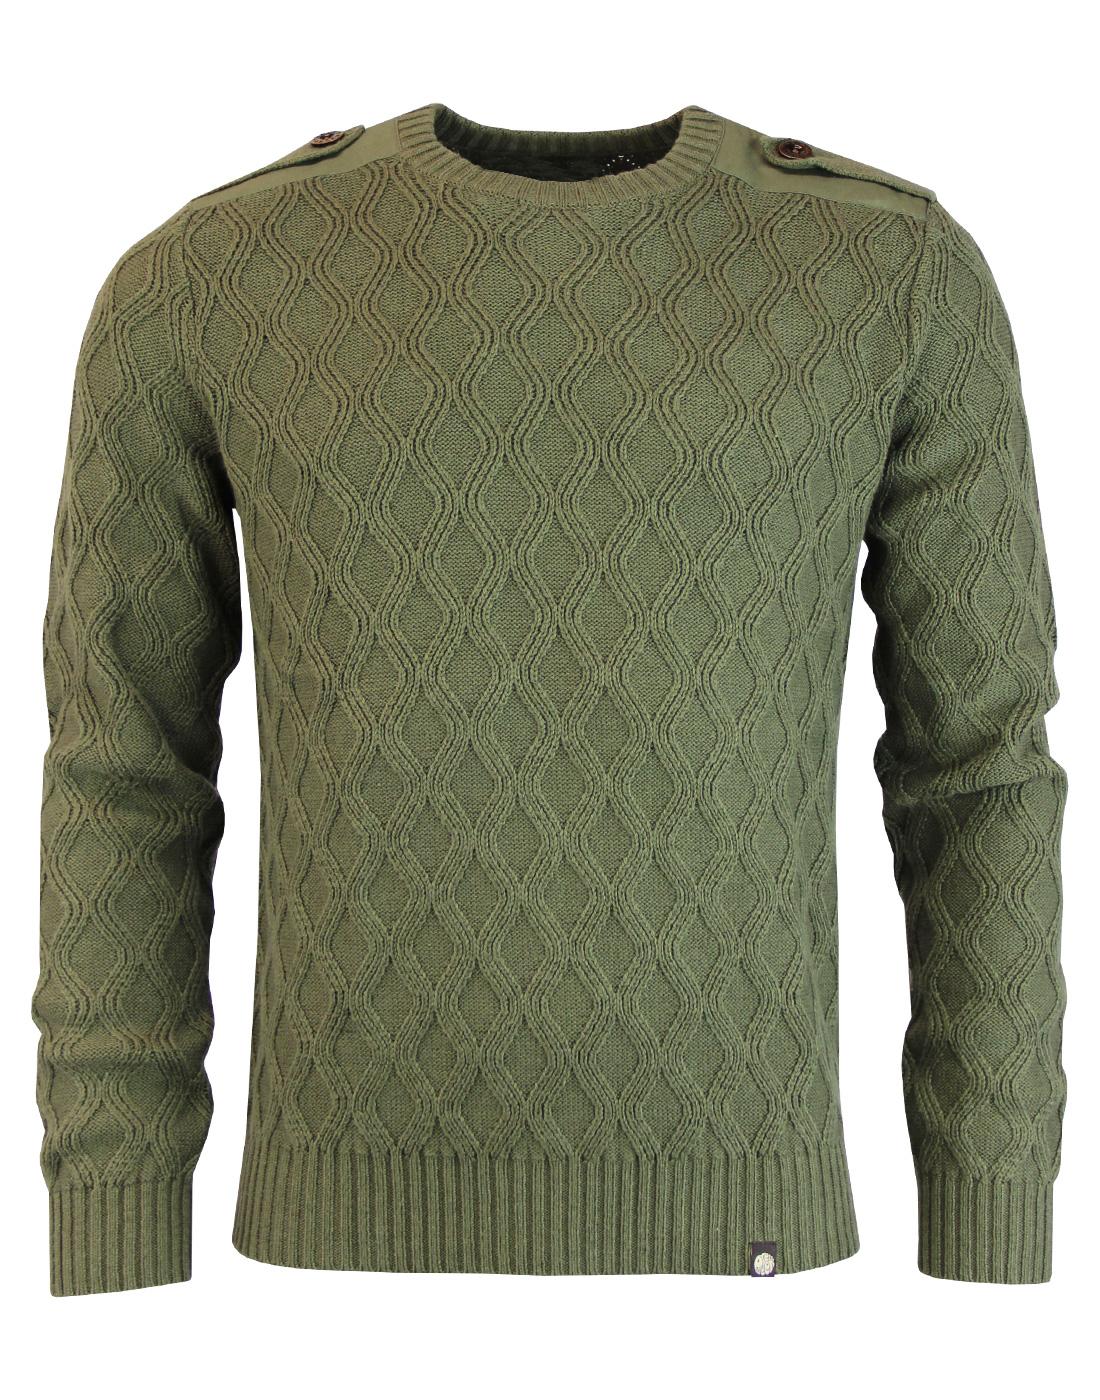 PRETTY GREEN Hertford 60s Mod Cable Knit Army Jumper in Khaki